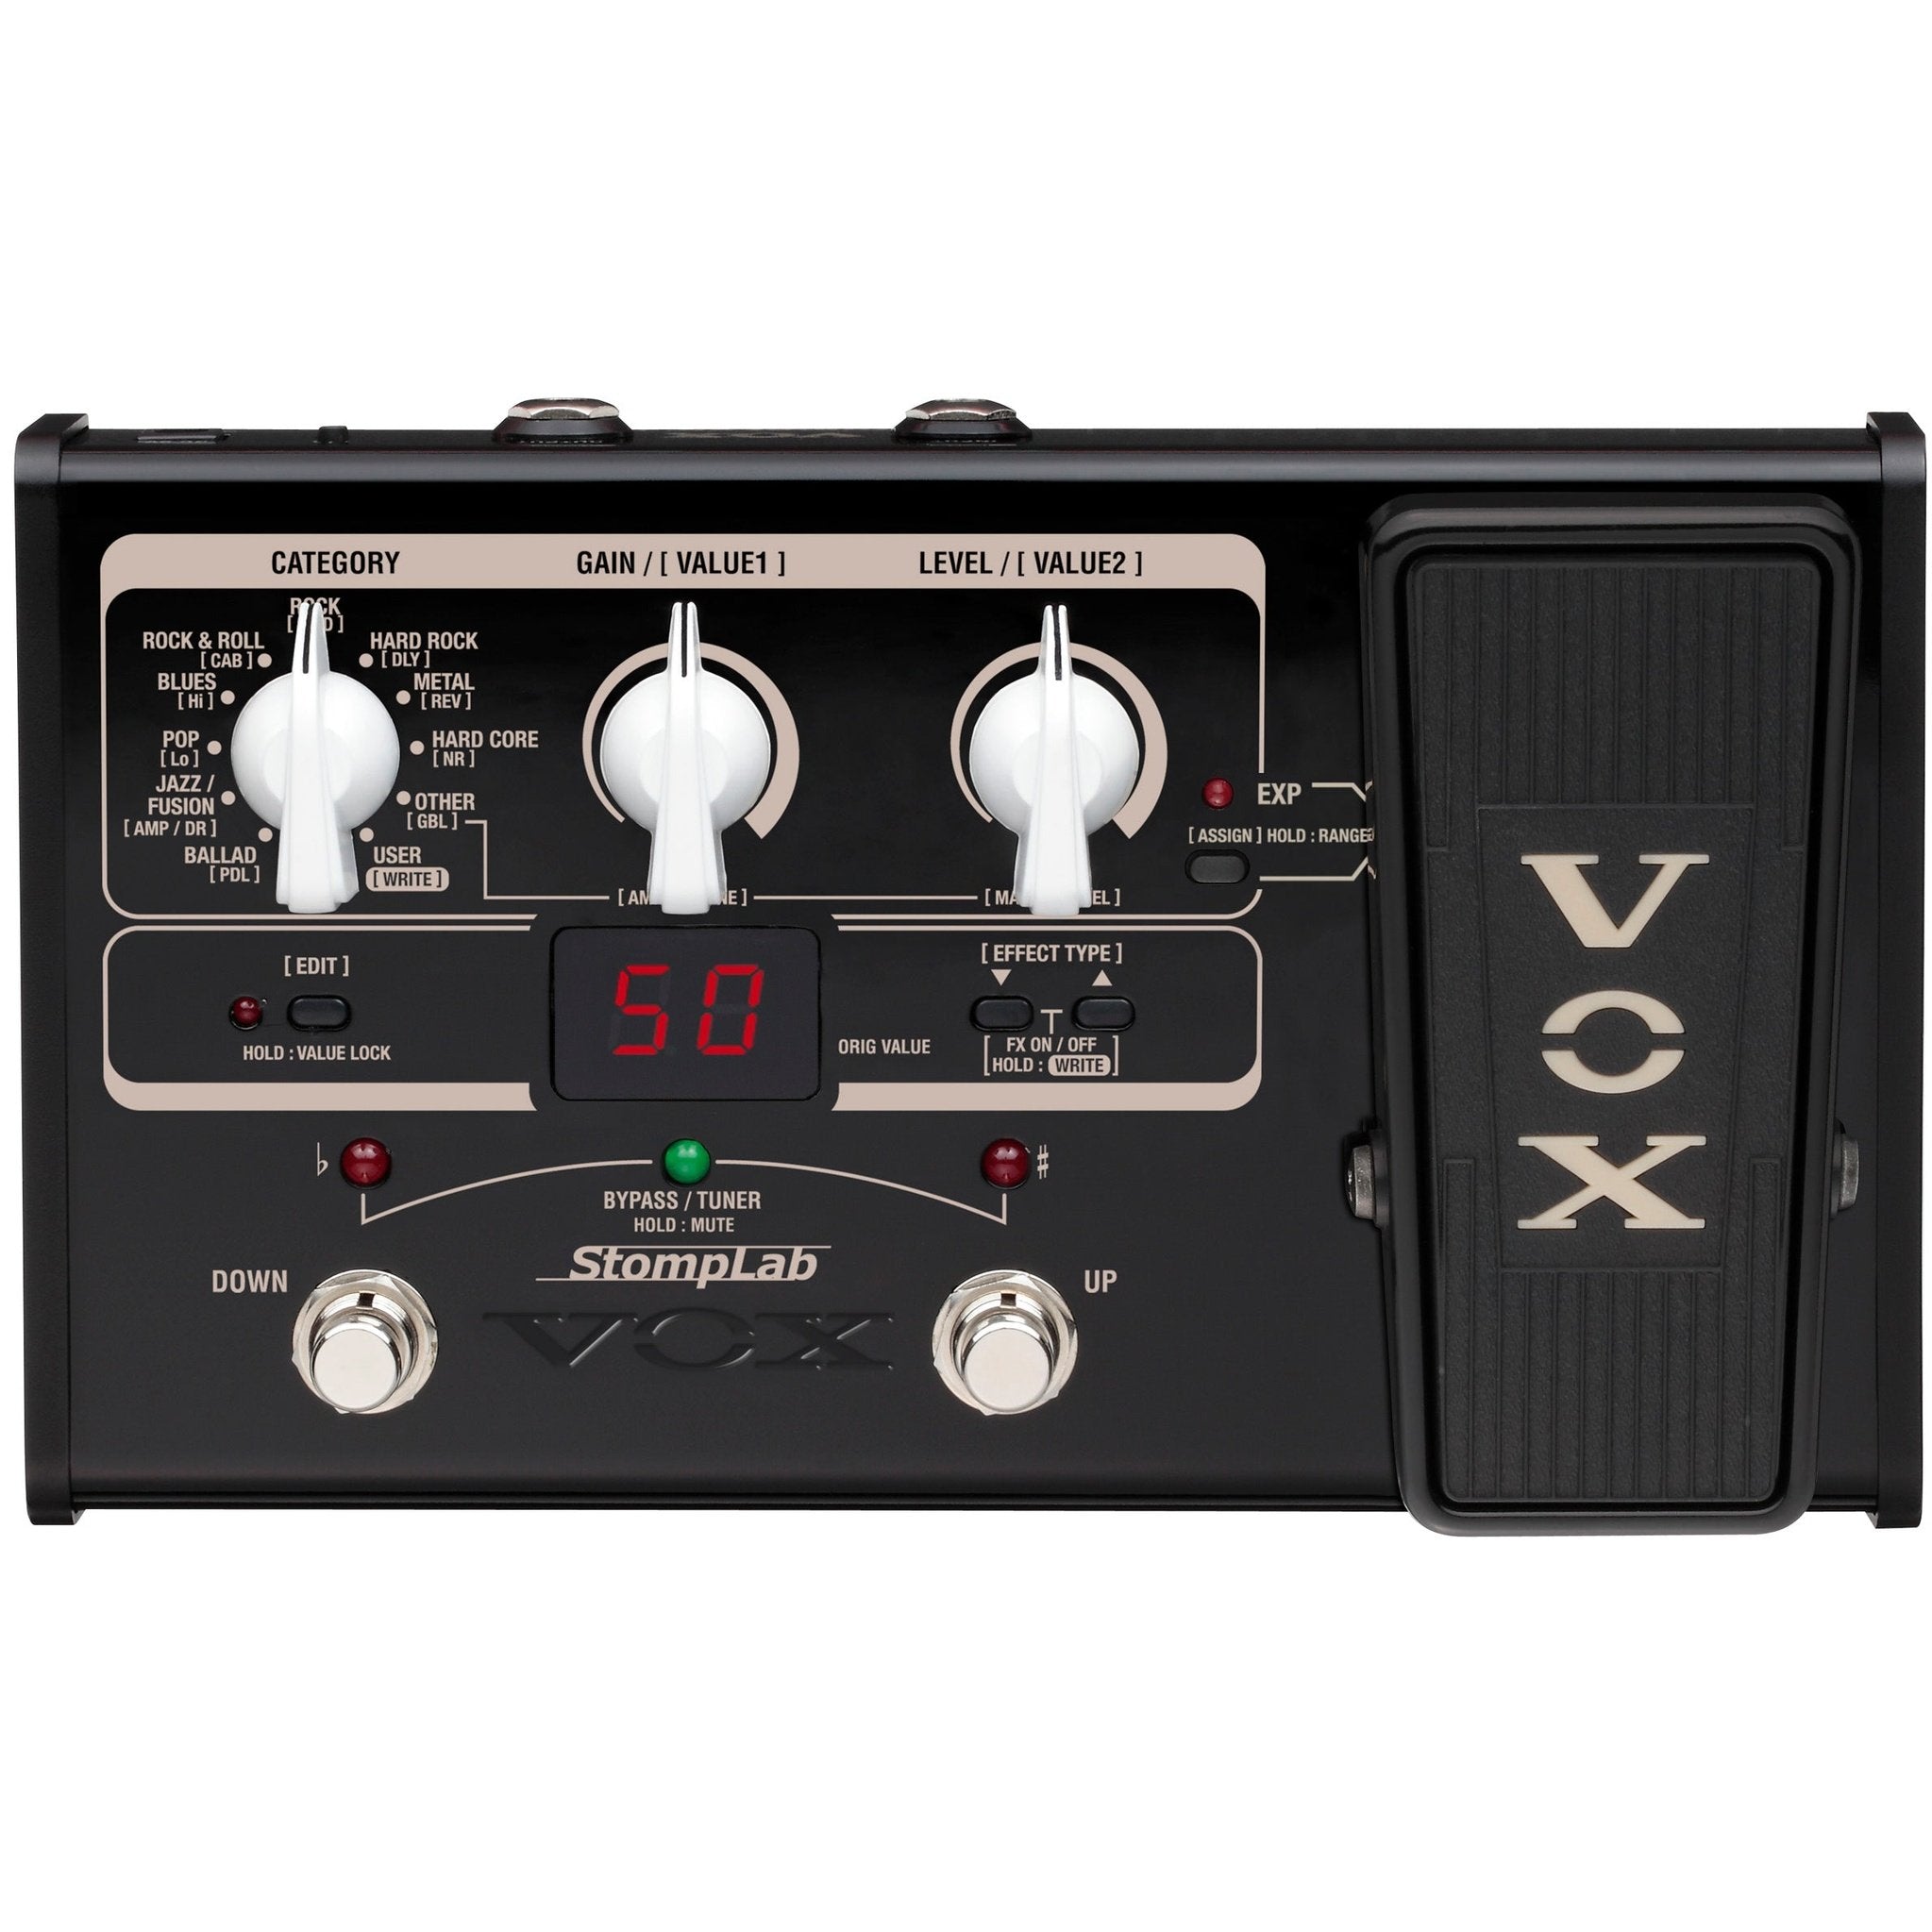 Vox Stomplab 2G Multi Effects - Guitar w/ Expression Pedal 1